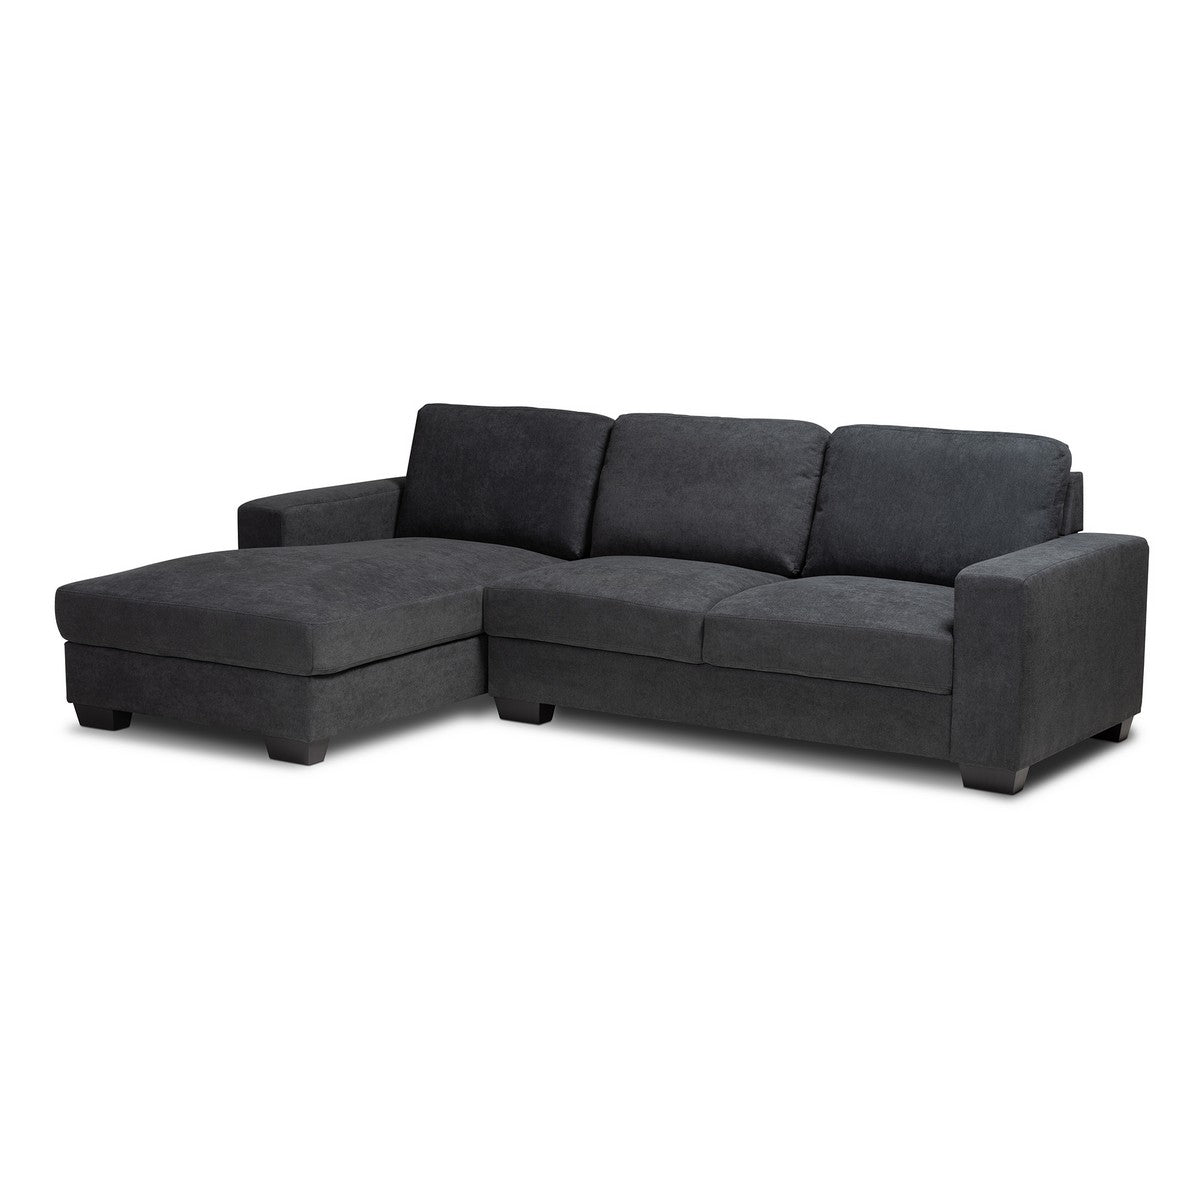 Baxton Studio Nevin Modern and Contemporary Dark Grey Fabric Upholstered Sectional Sofa with Left Facing Chaise Baxton Studio-sectionals-Minimal And Modern - 1